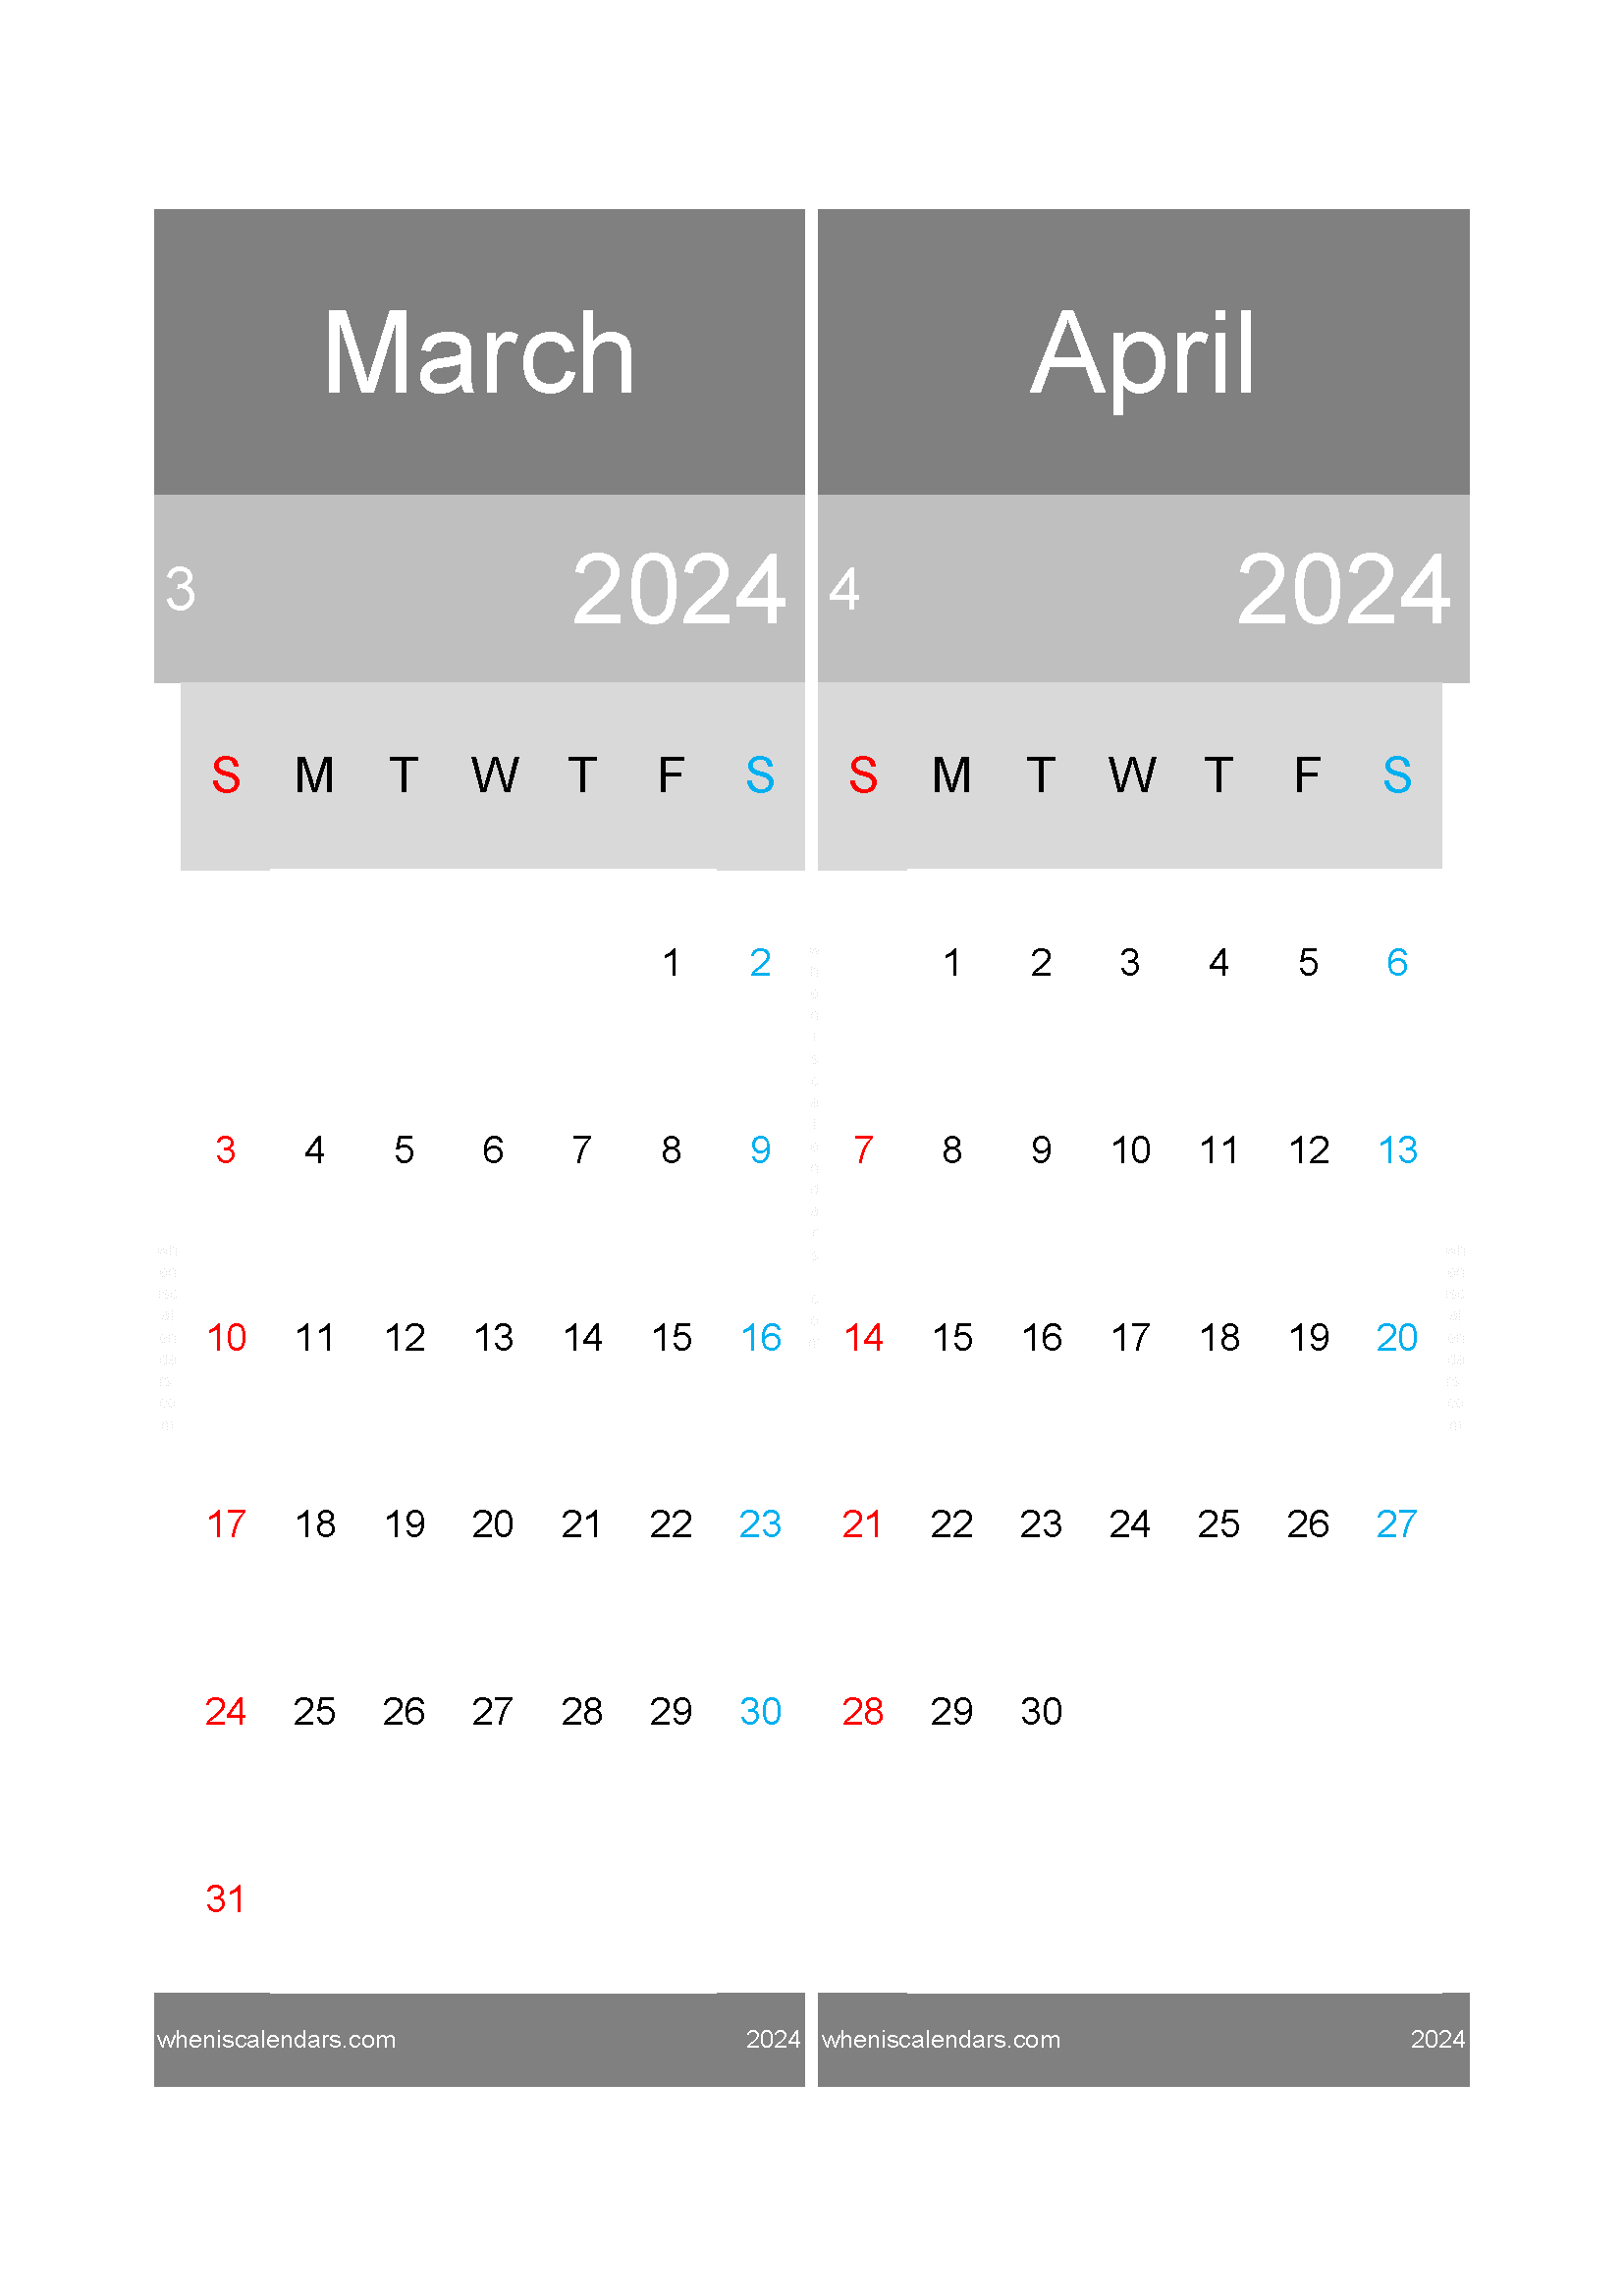 Mar and April Calendar 2024 Two-Month